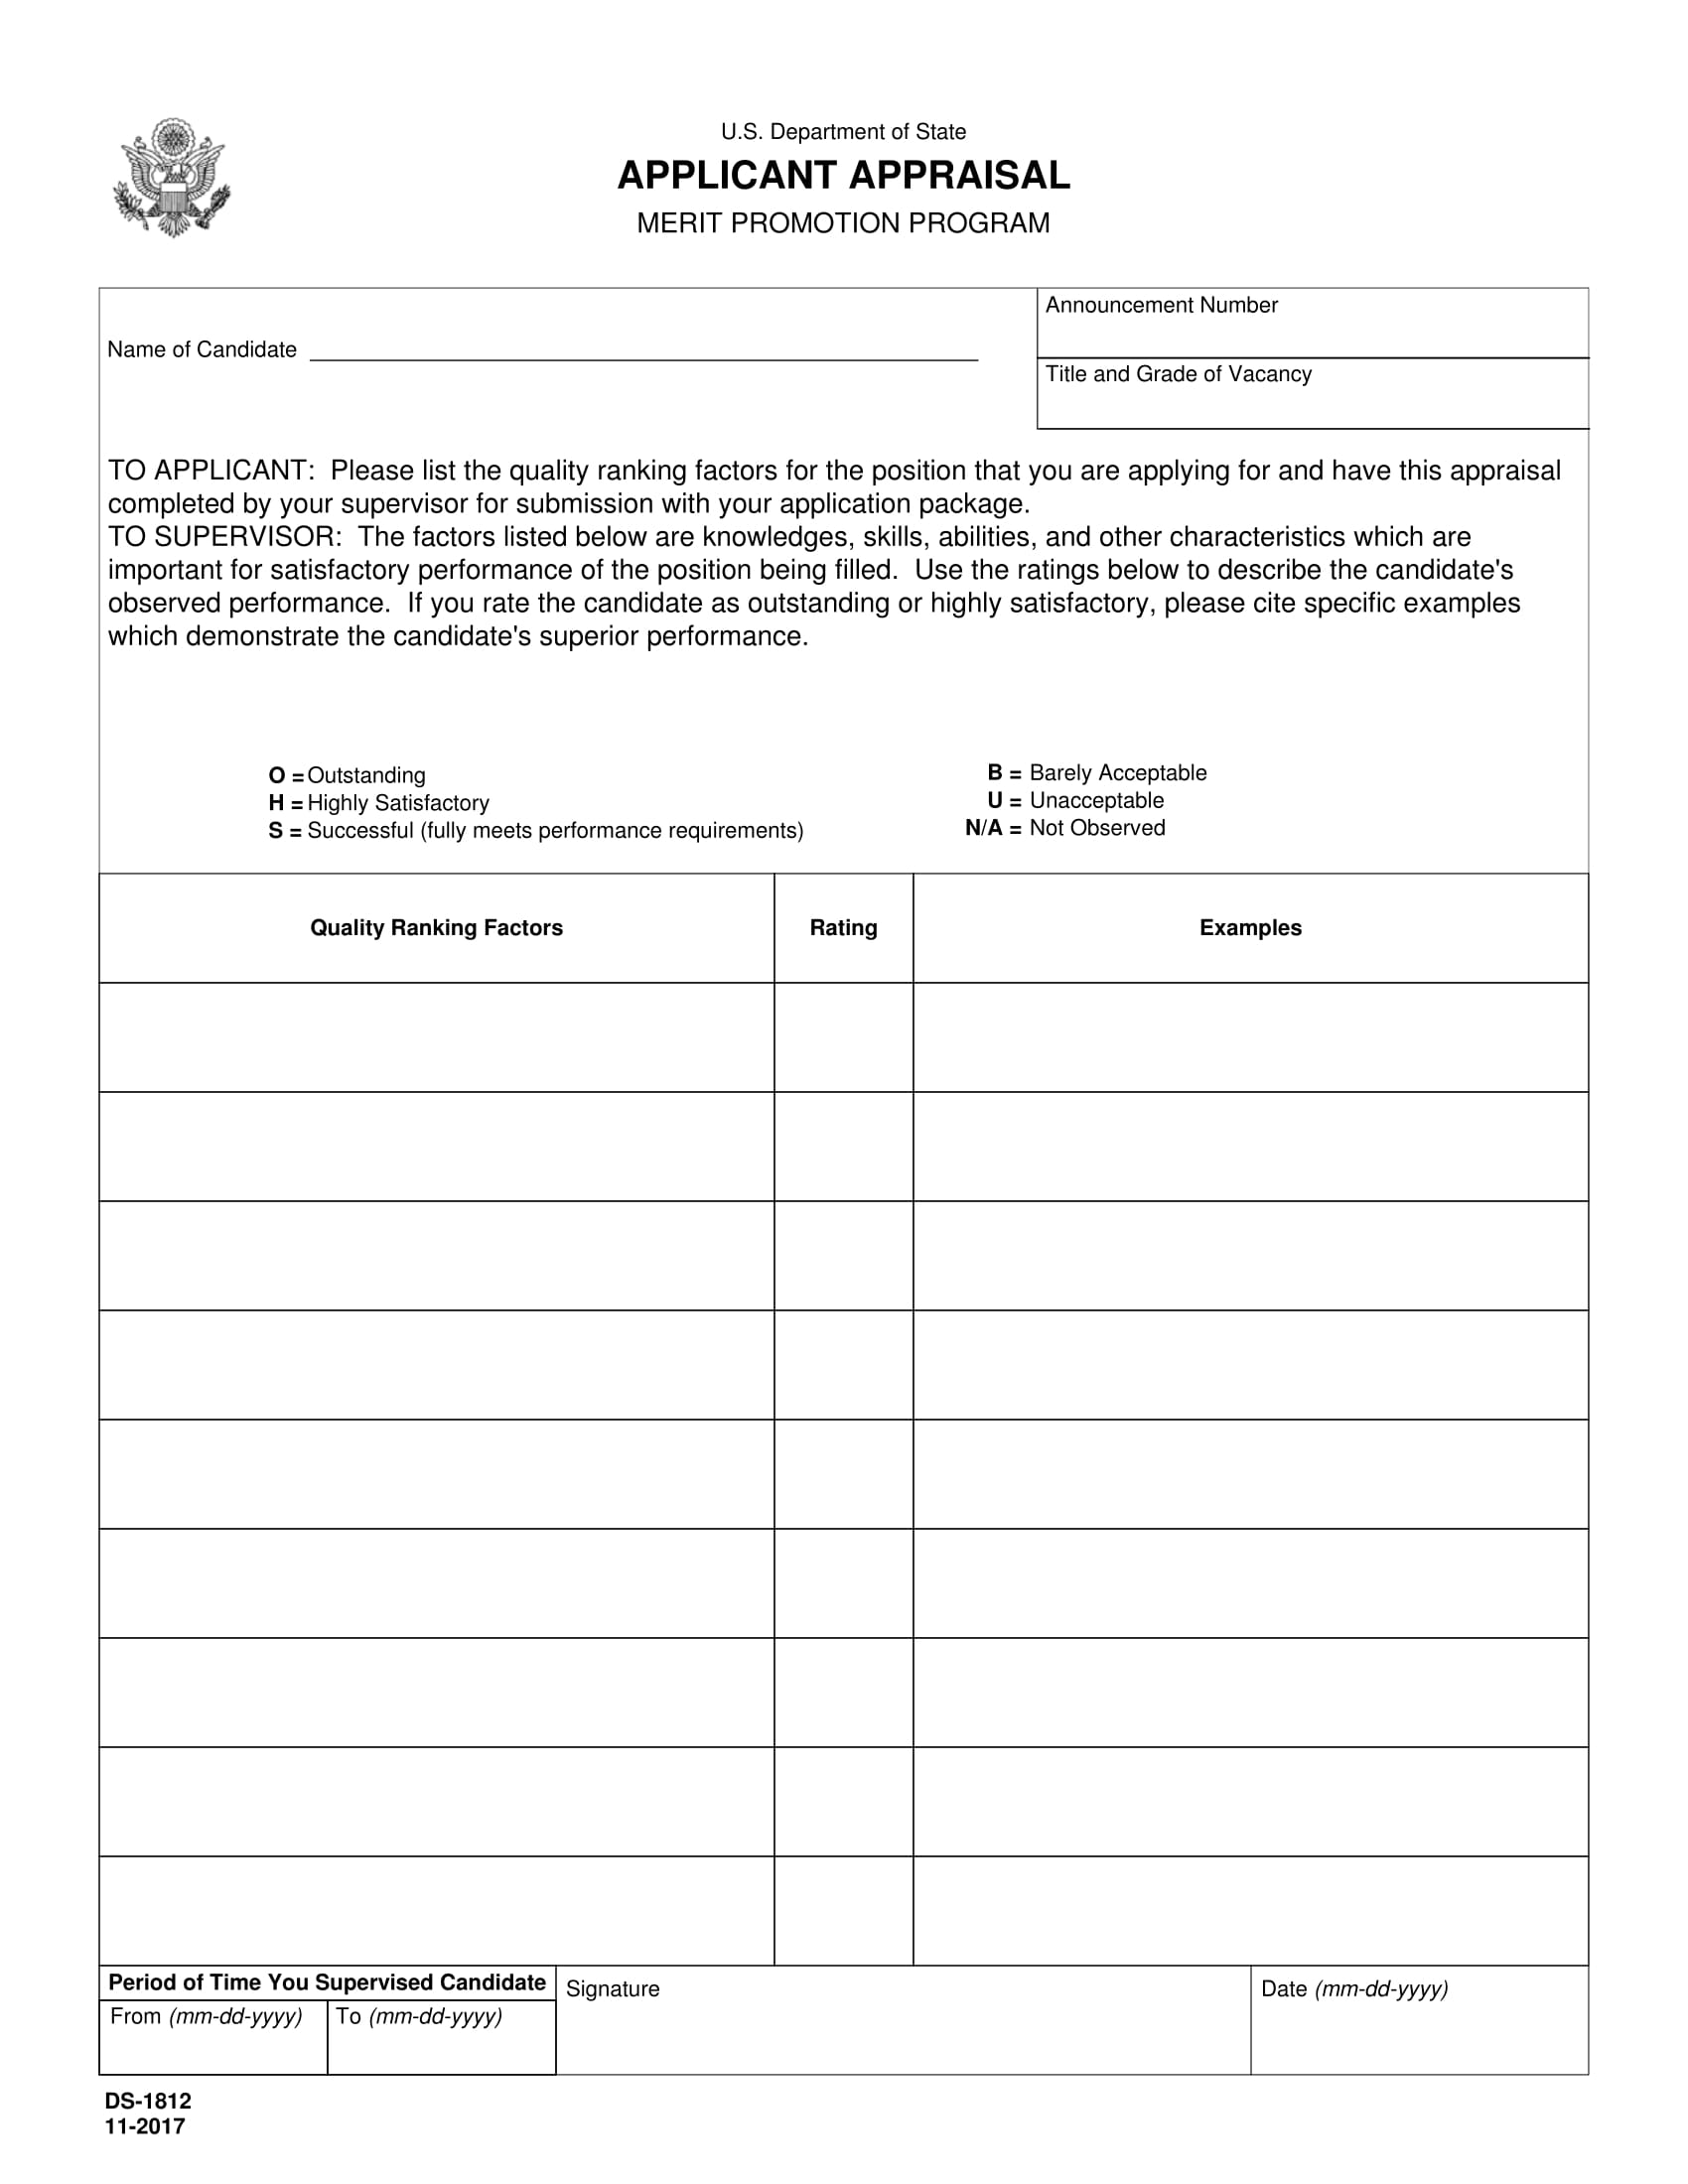 state applicant appraisal form 1